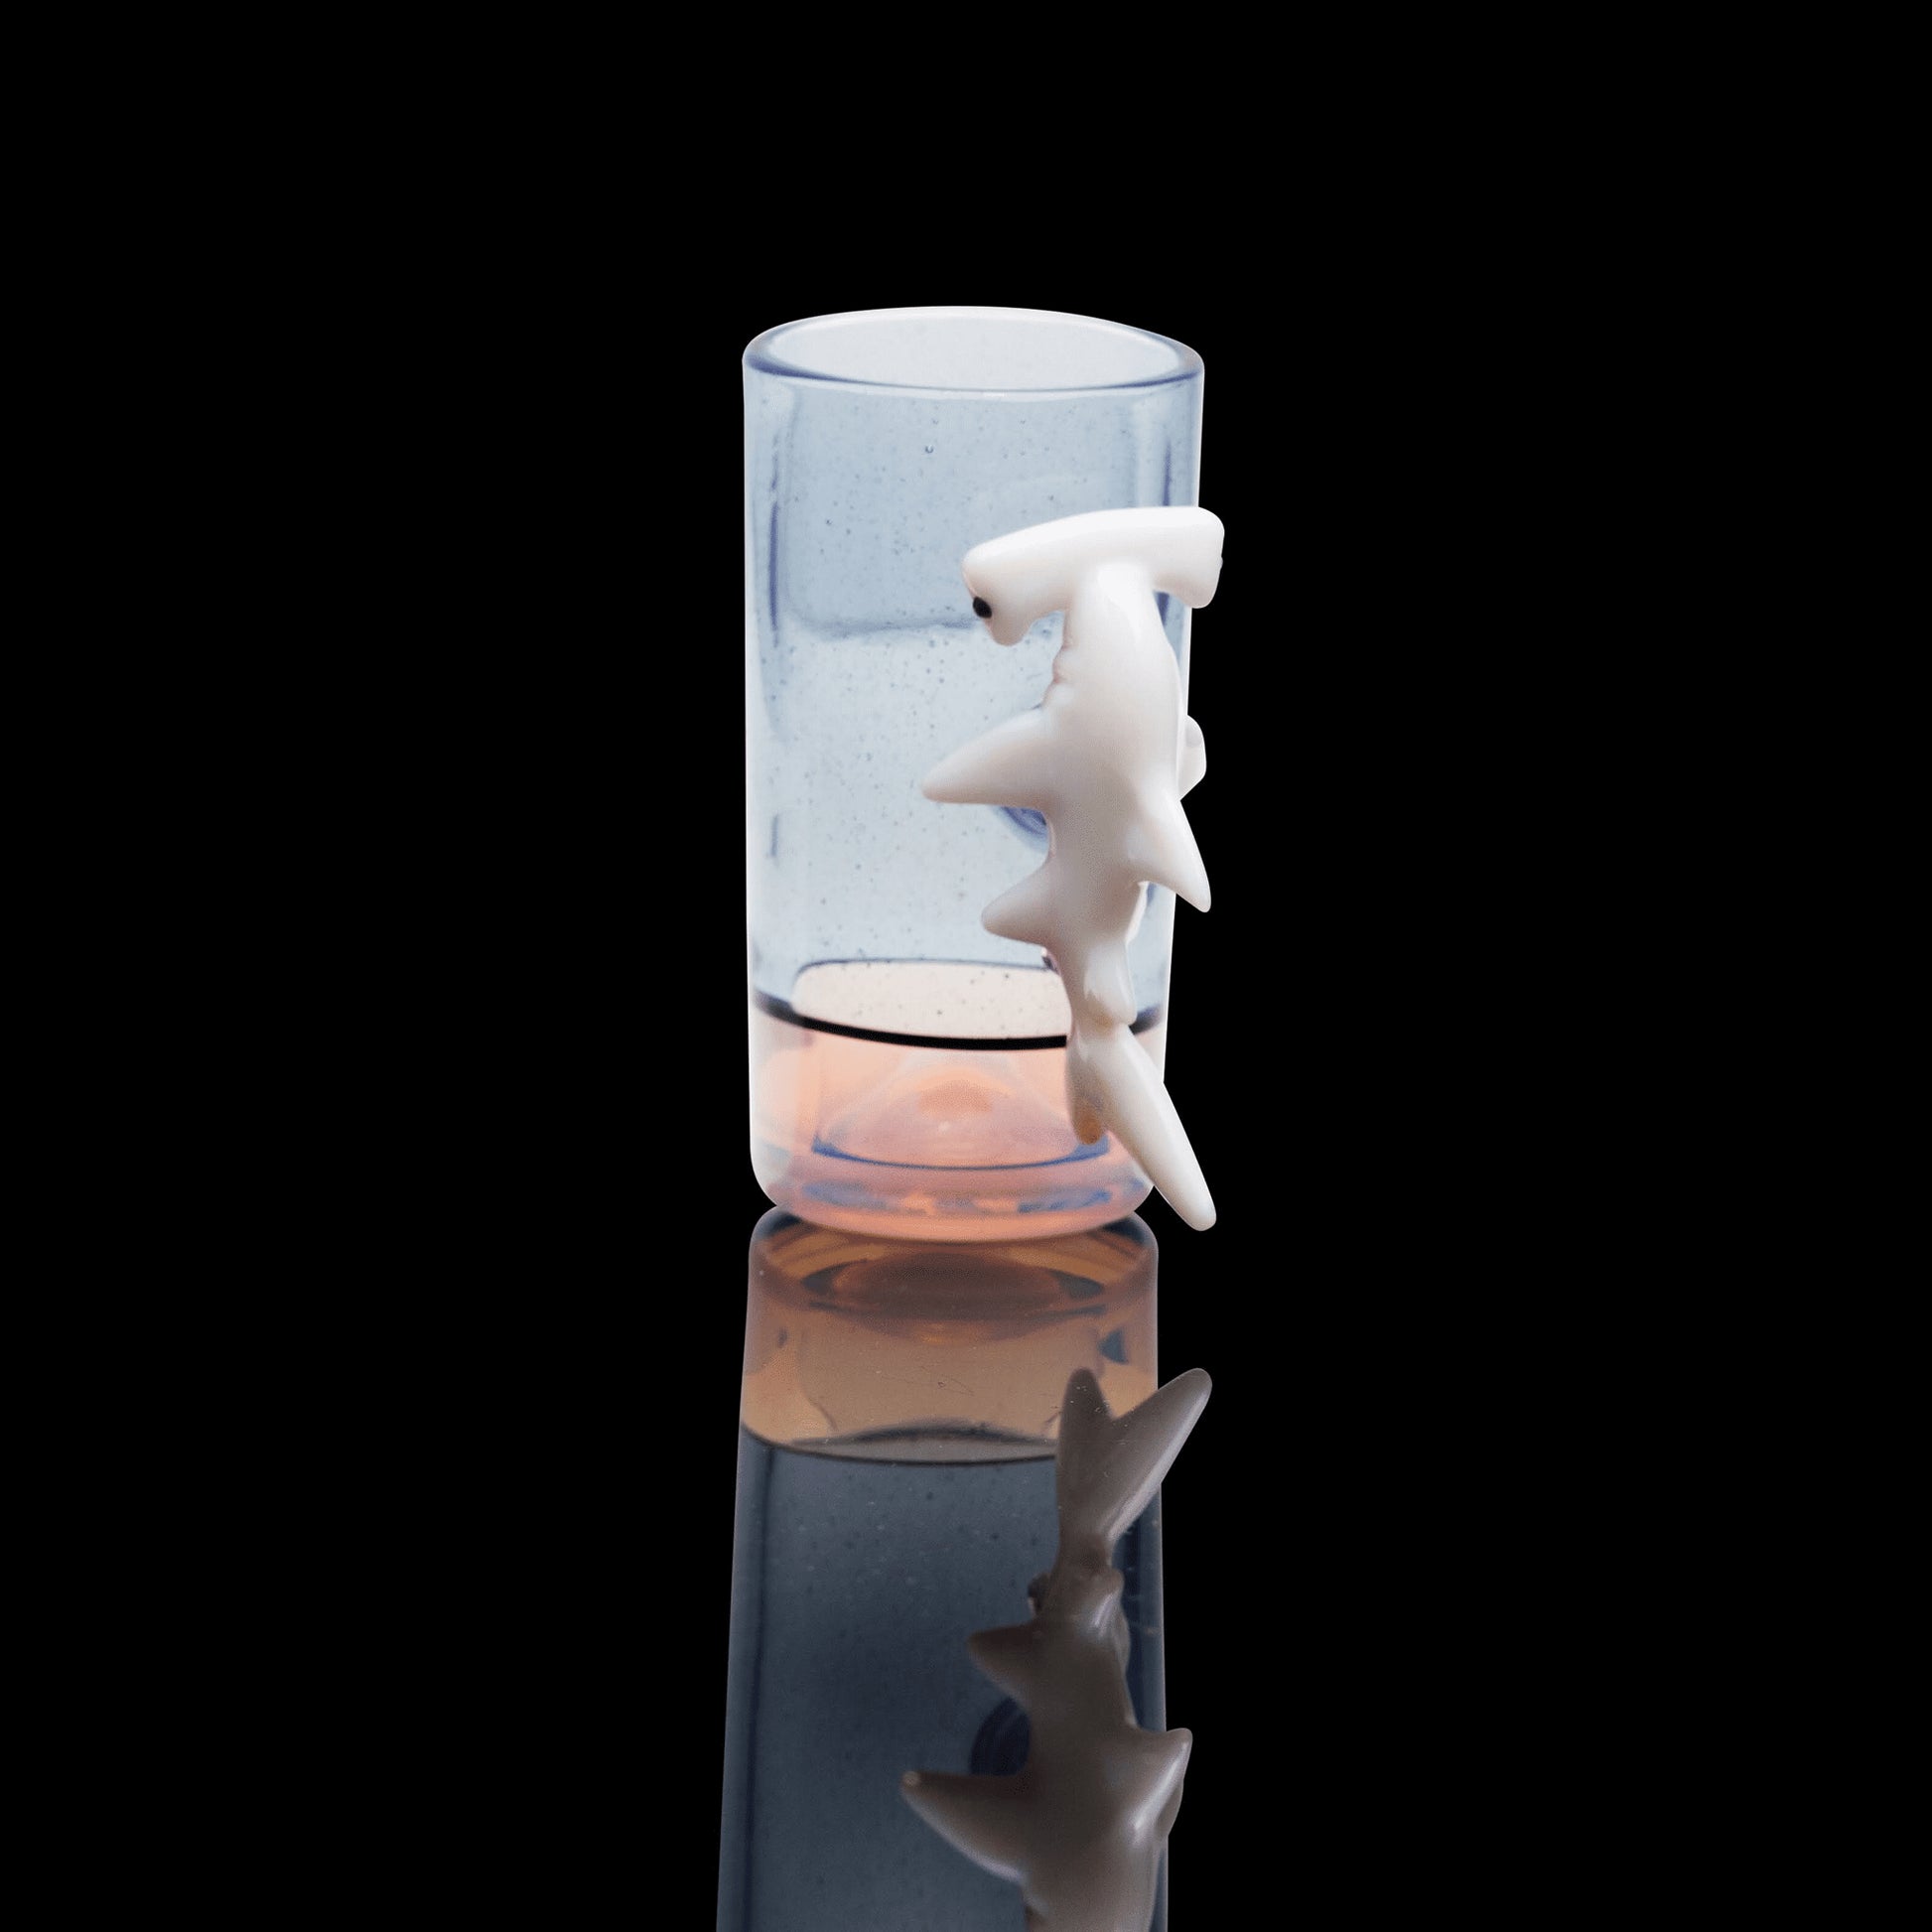 artisan-crafted design of the Shot Glass by Liz Wright (Coffee + Colada 2022)